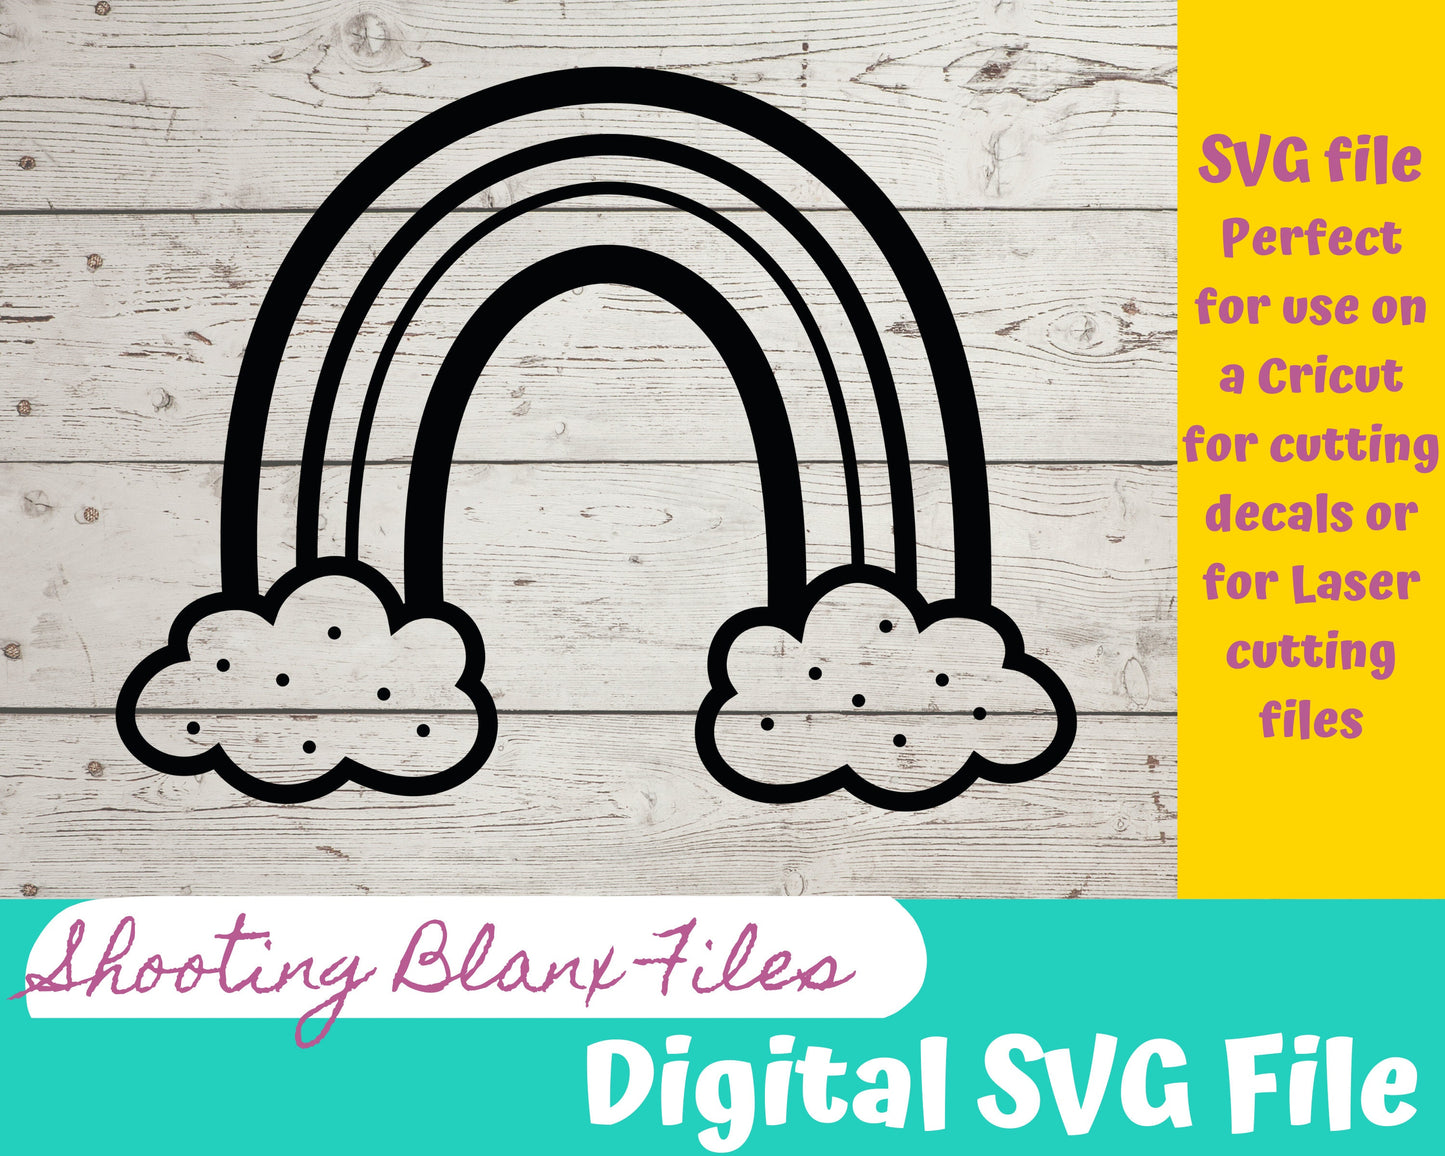 Rainbow bundle SVG files perfect for Cricut, Cameo, or Silhouette also for laser engraving Glowforge, Hand, love, God, Sky